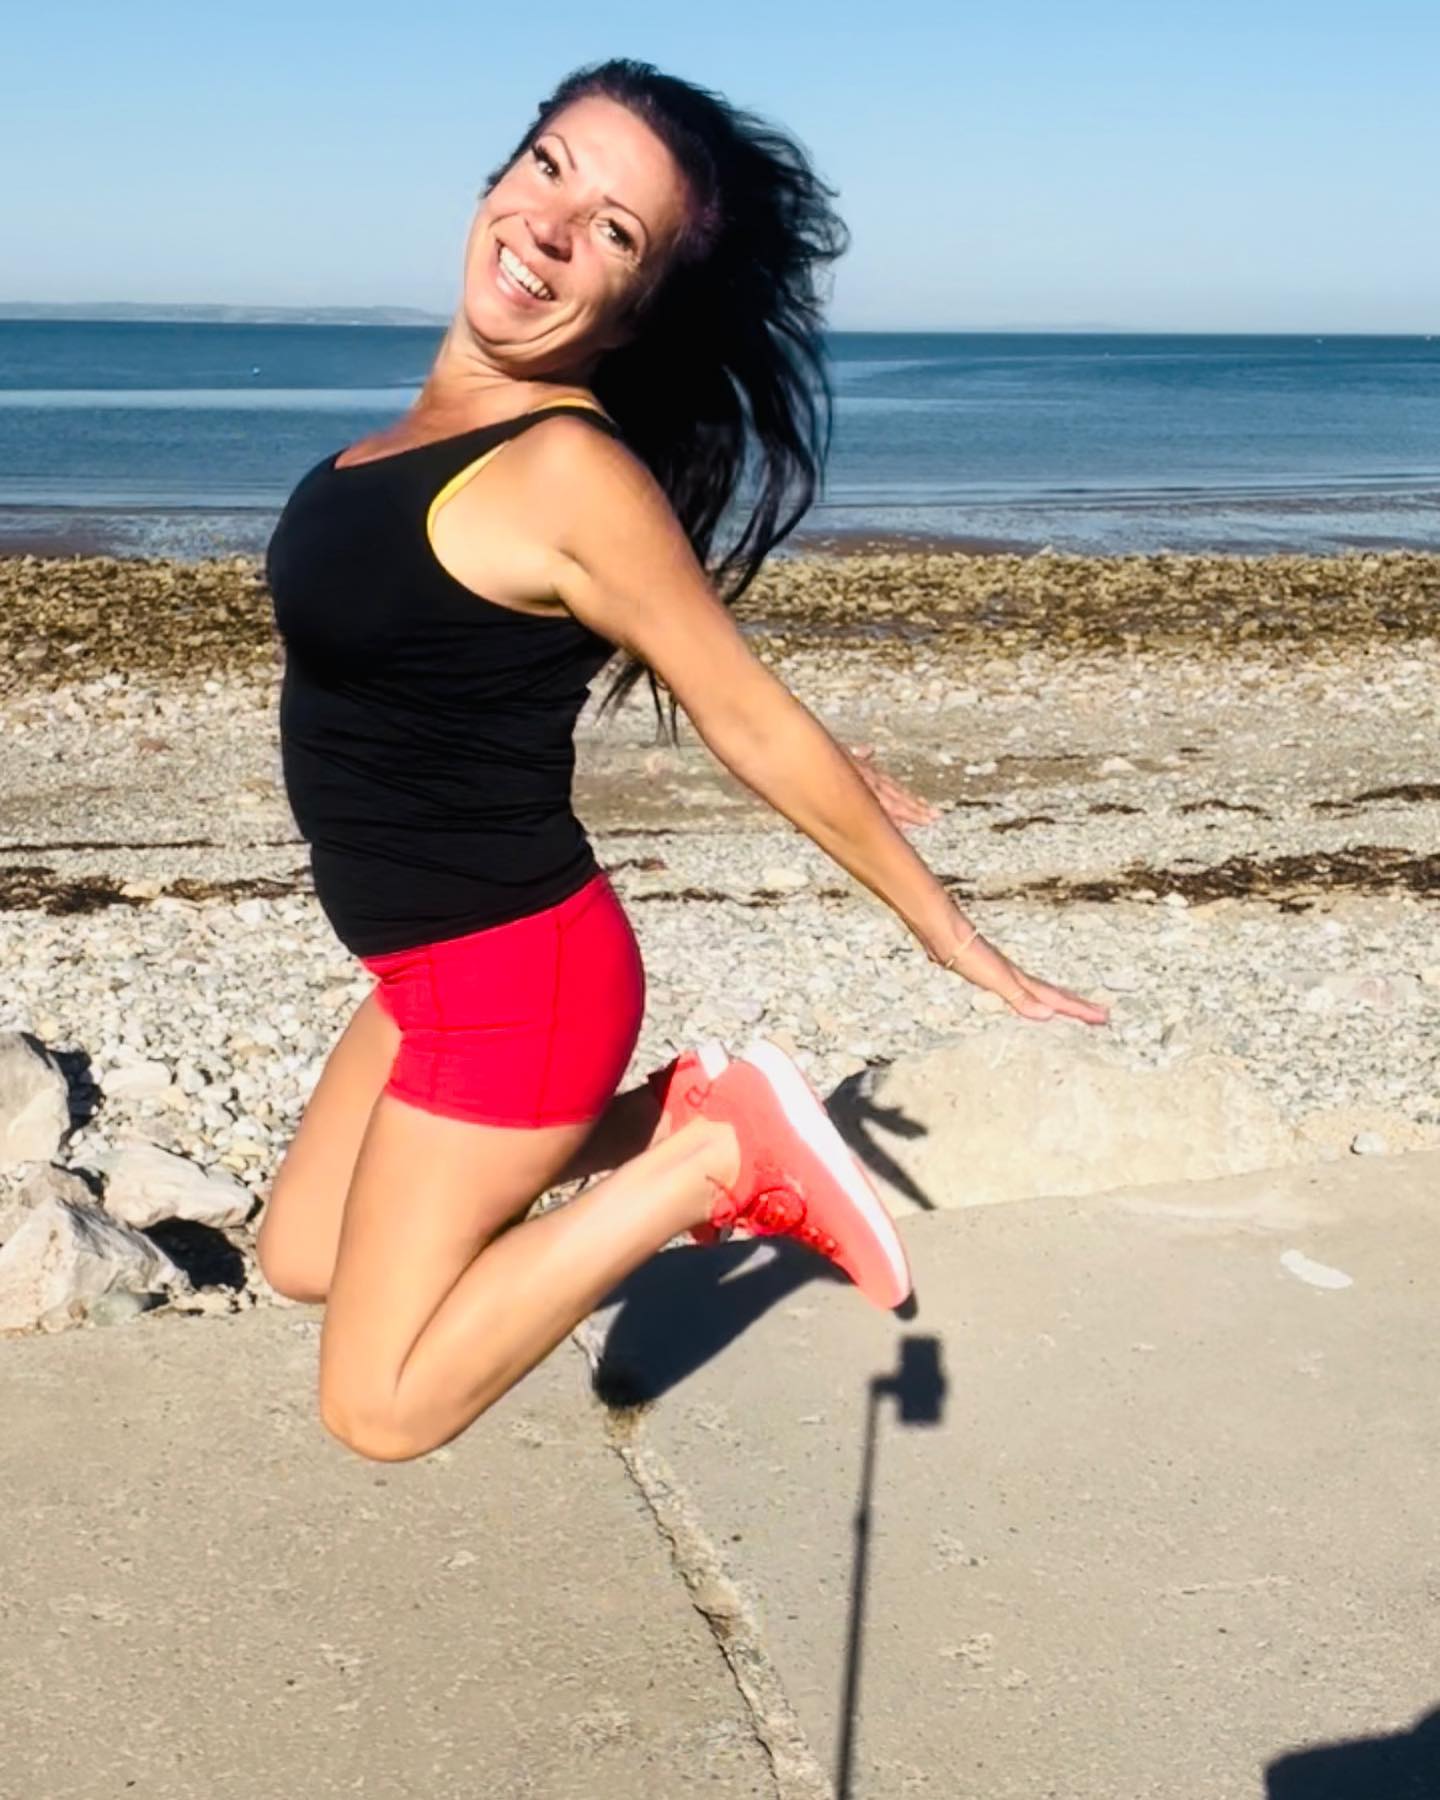 Having fun on the beach filming this mornings workout and taking pics.  I love being outside in the sunshine right next to the Ocean. #ocean #sea #onlineworkouts #ladiesonlineworkouts